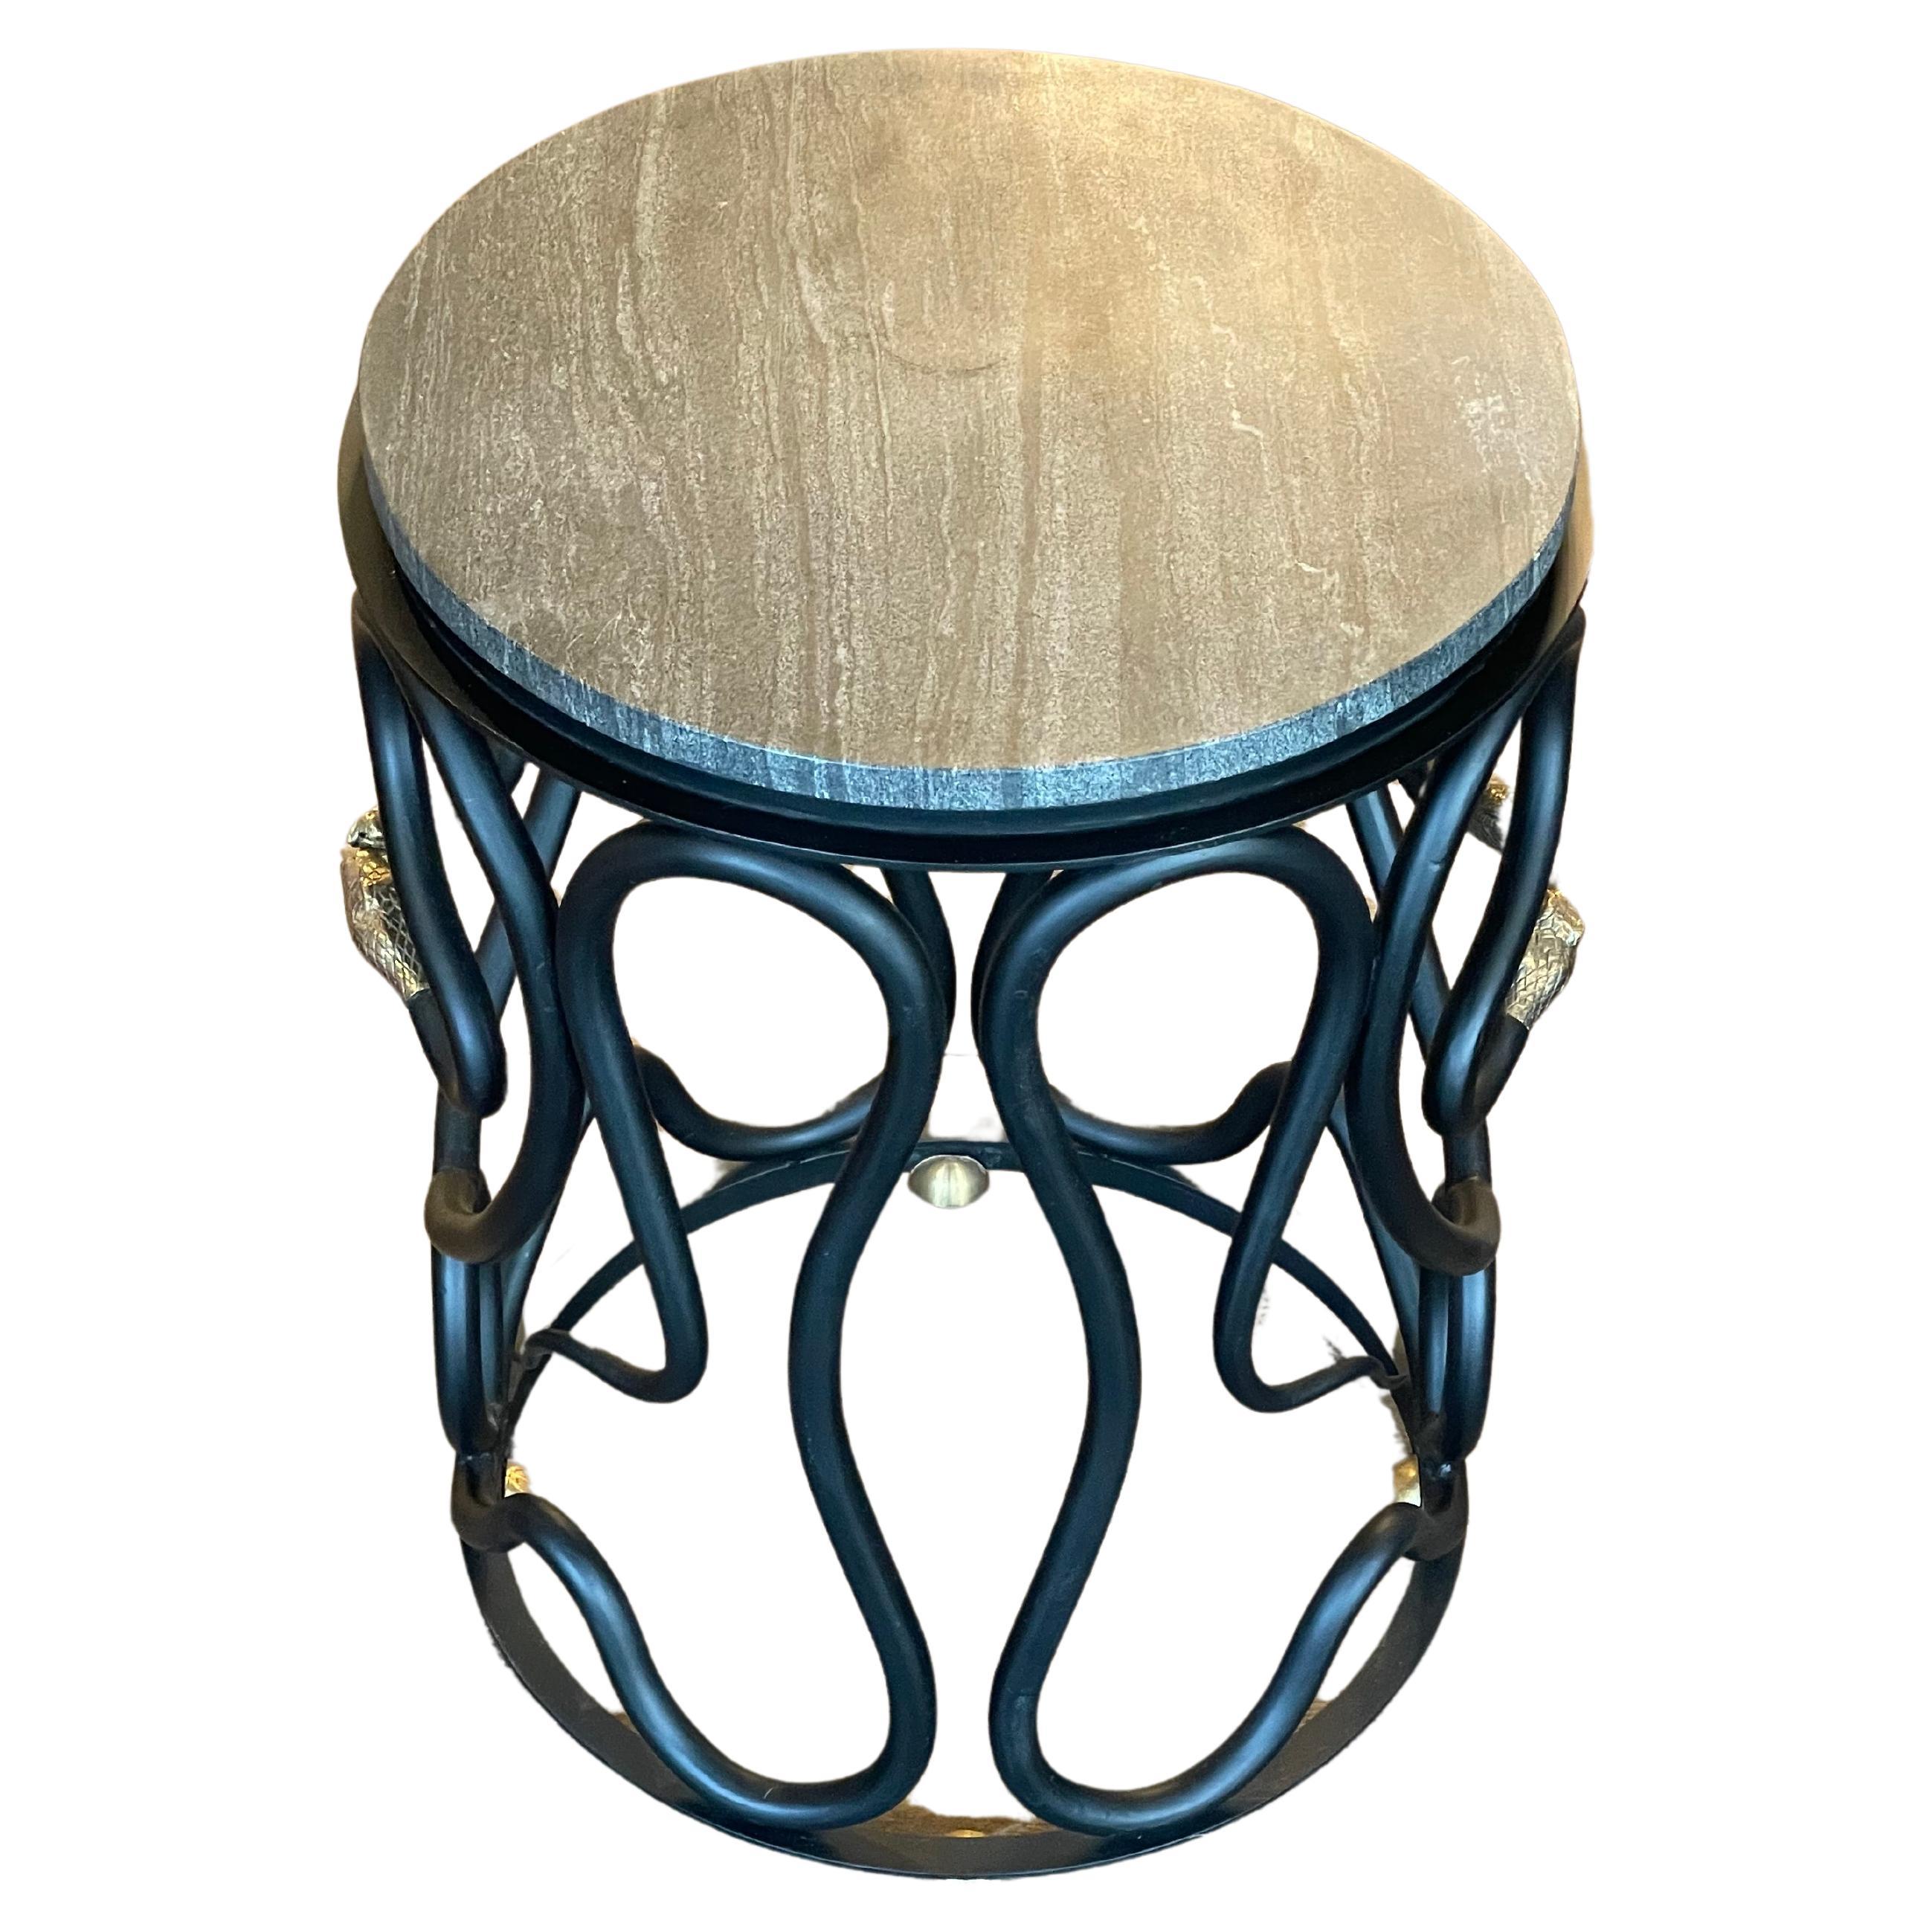 Serpentine Paul Marra Side Table, with Cement Stone Top
Hand-forged ironwork
Fitted with brass snake head detailing
Handmade in Los Angeles, California


